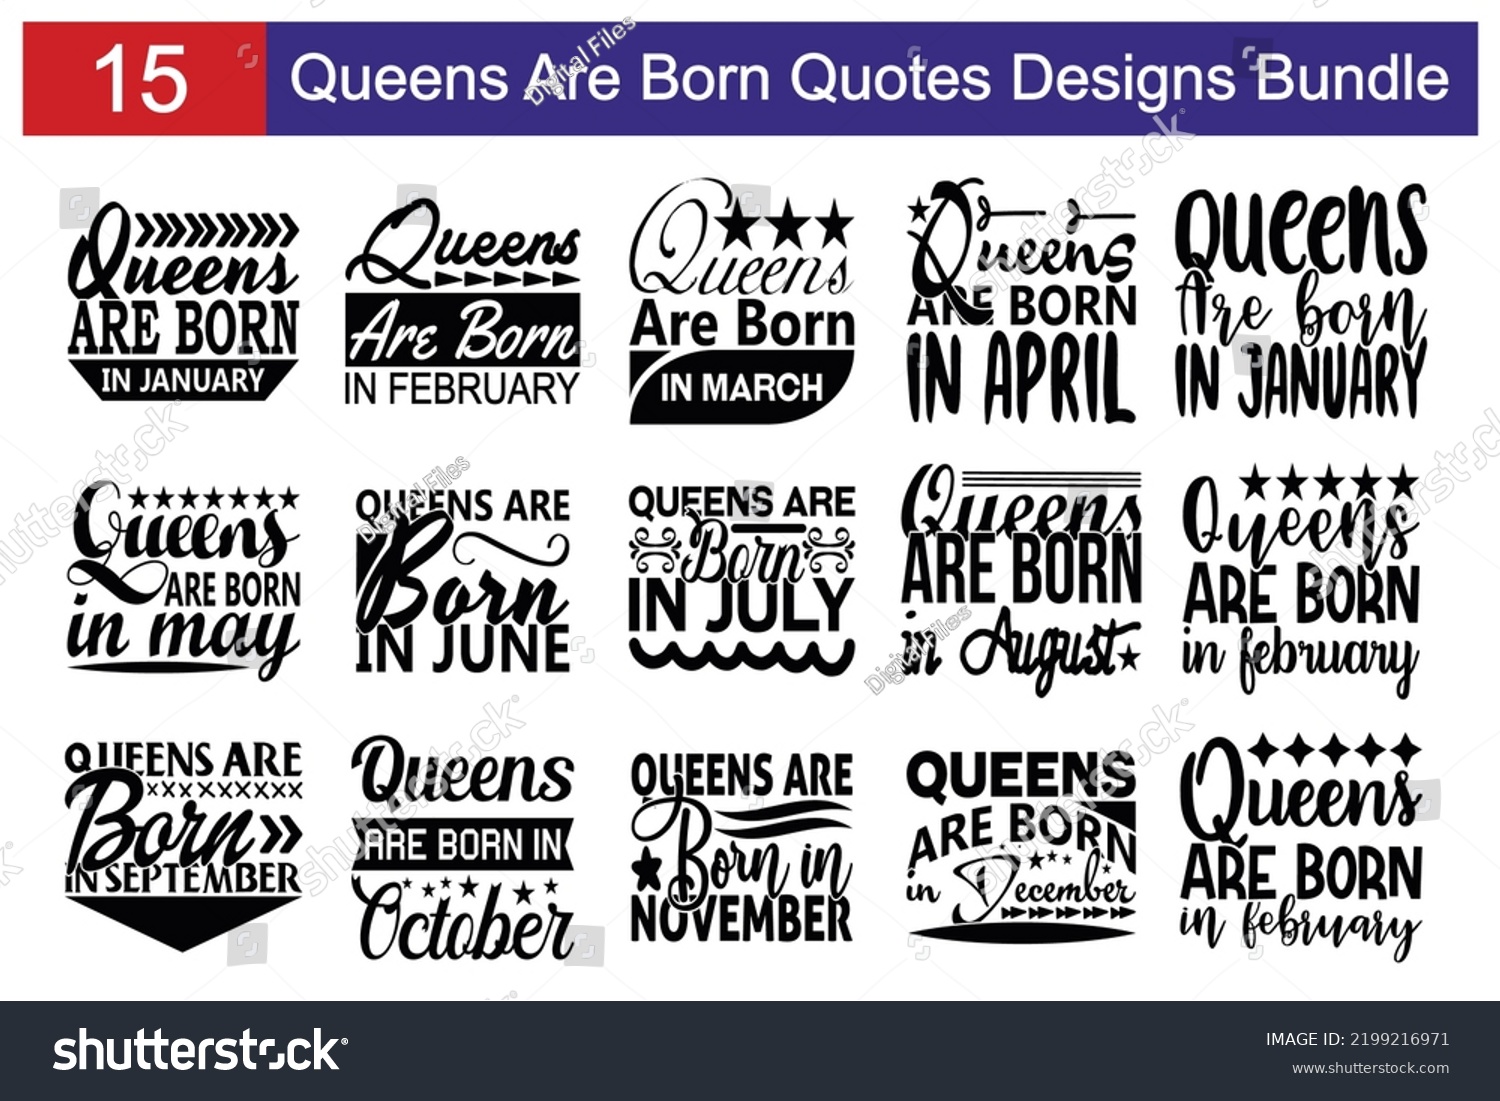 SVG of Queens Are Born  Quotes SVG Cut Files Designs Bundle. Queens Are Born  quotes SVG cut files, Queens Are Born  quotes t shirt designs, Saying about Queens Are Born . svg